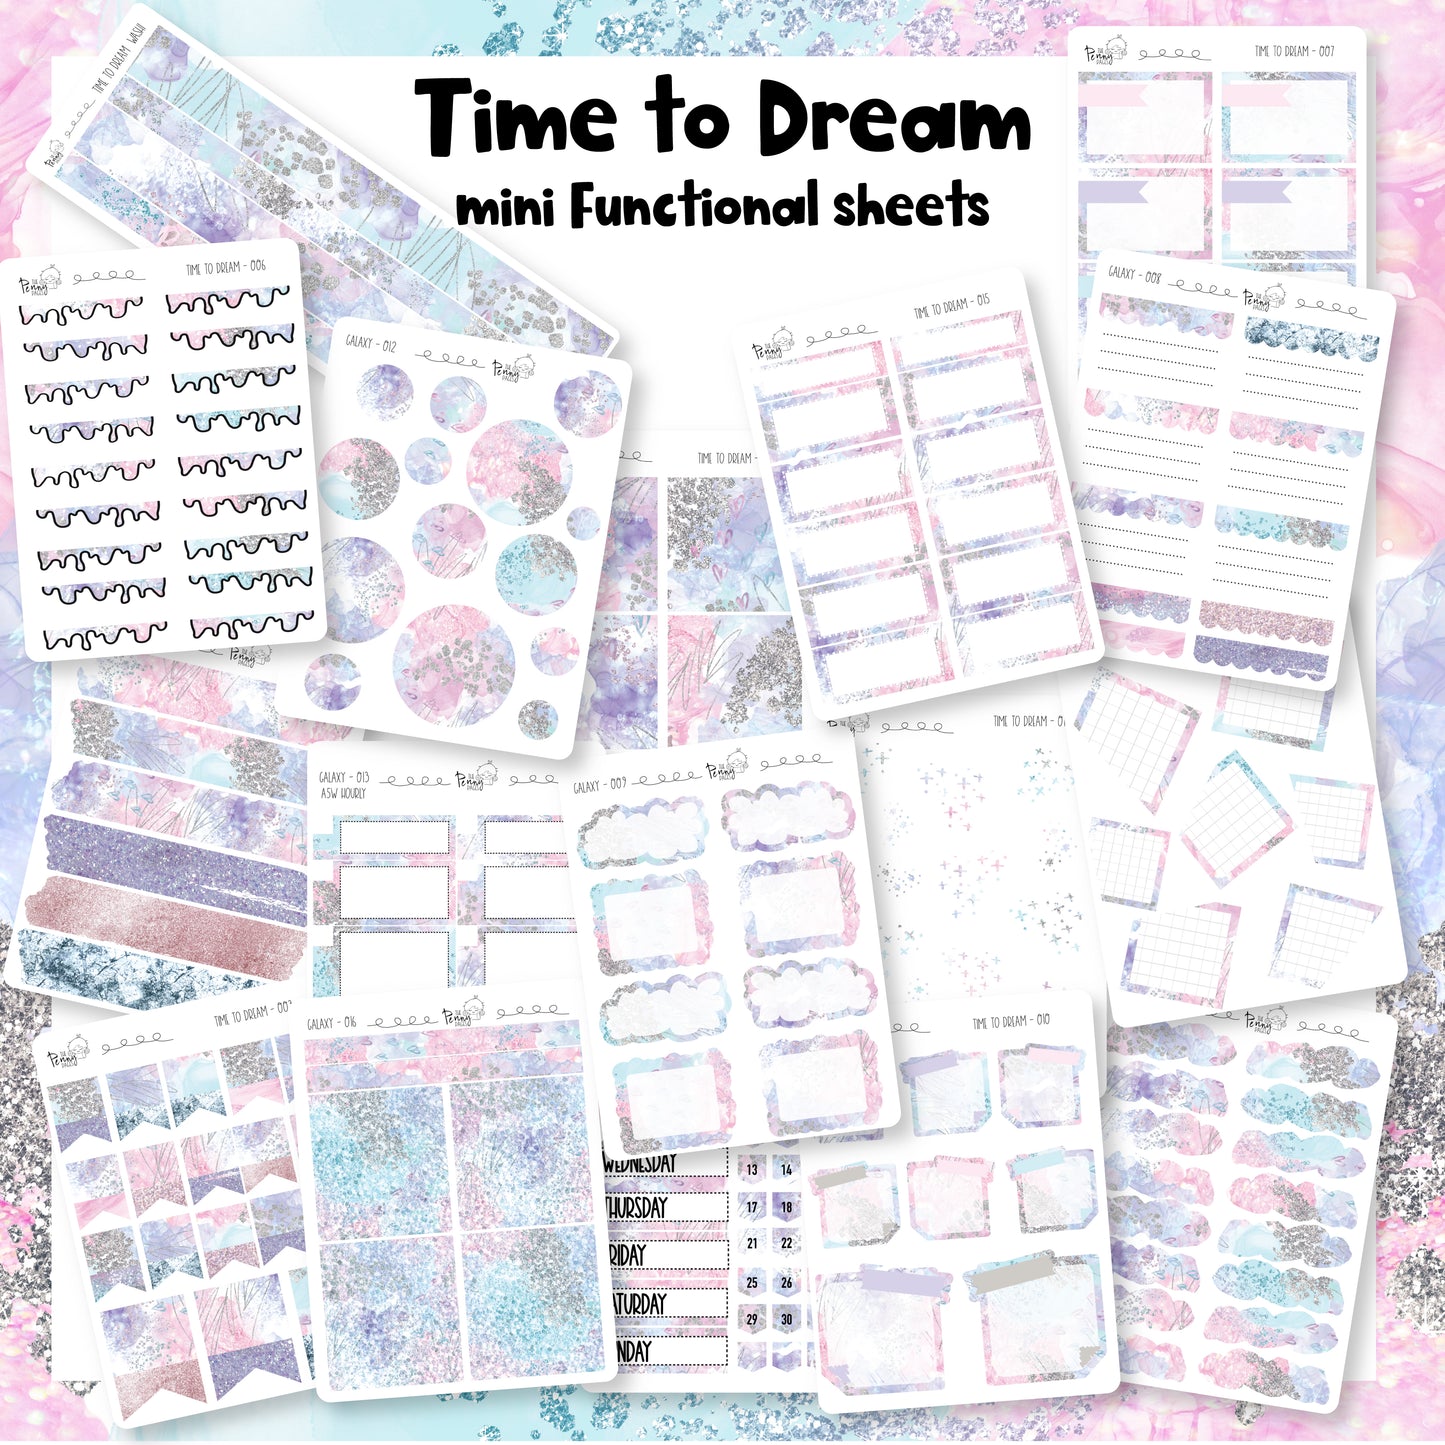 Time to Dream - Mini Functional sheets